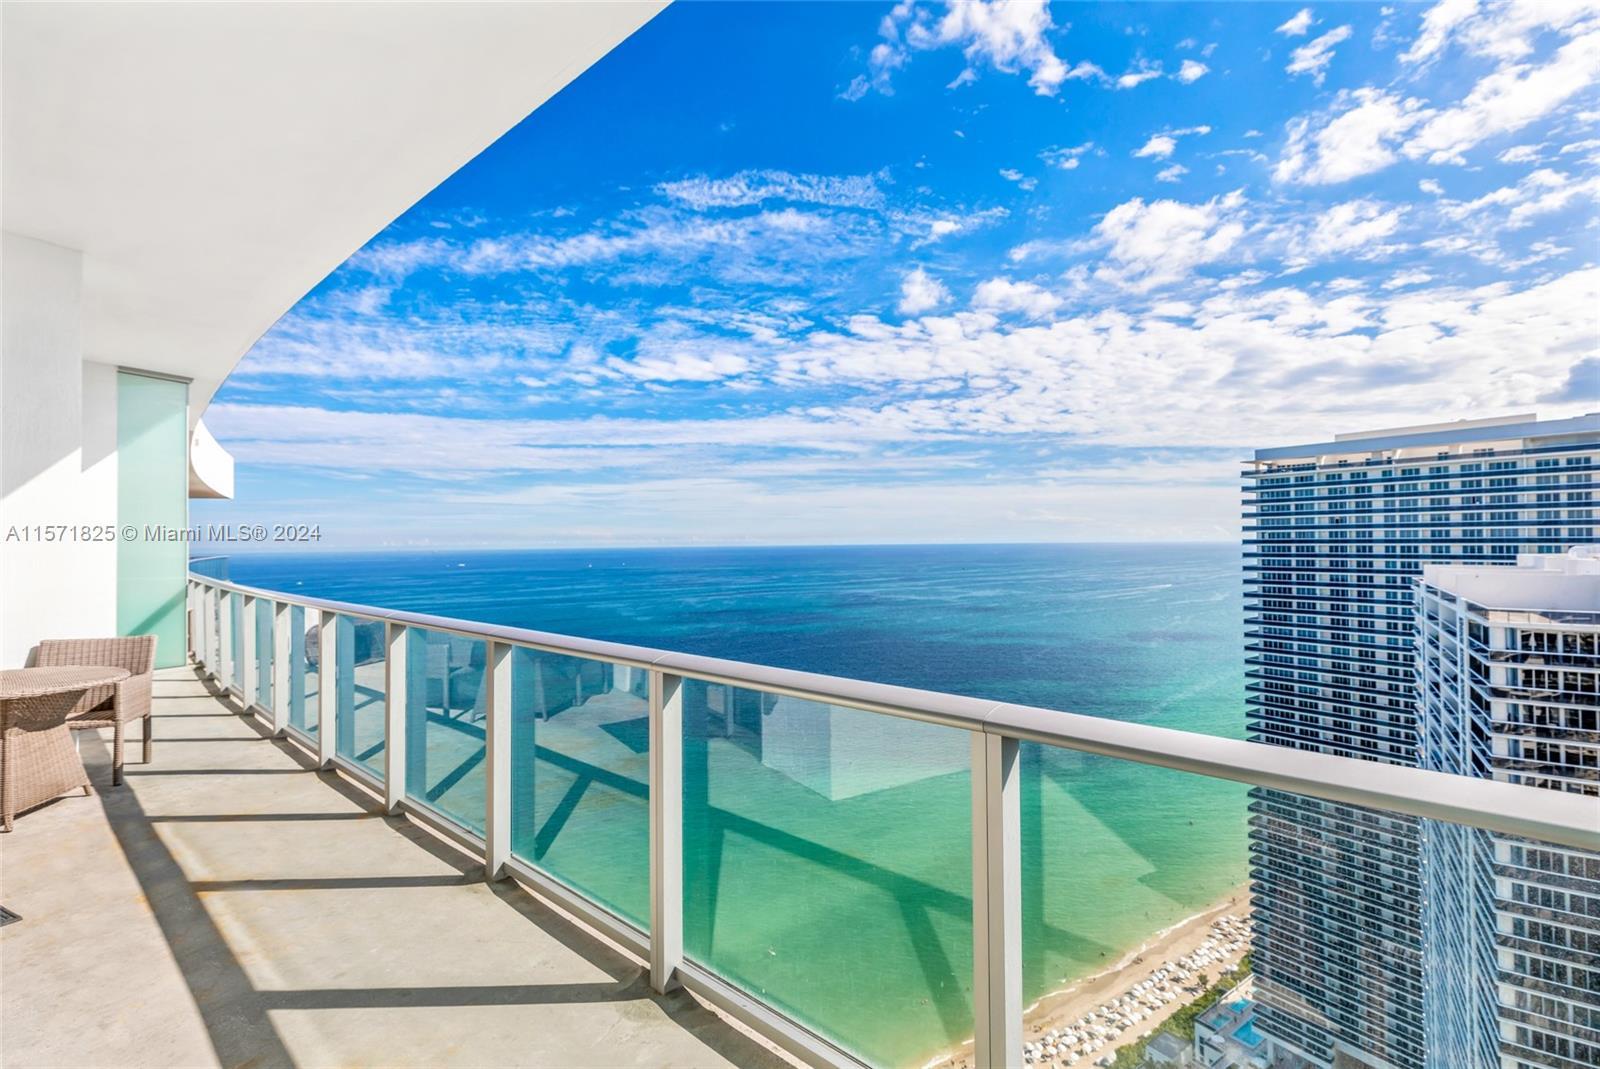 BREATHTAKING OCEAN AND INTRACOASTAL VIEWS FROM THIS STUNNING 2 BEDROOM PENTHOUSE WITH HIGH CEILINGS.